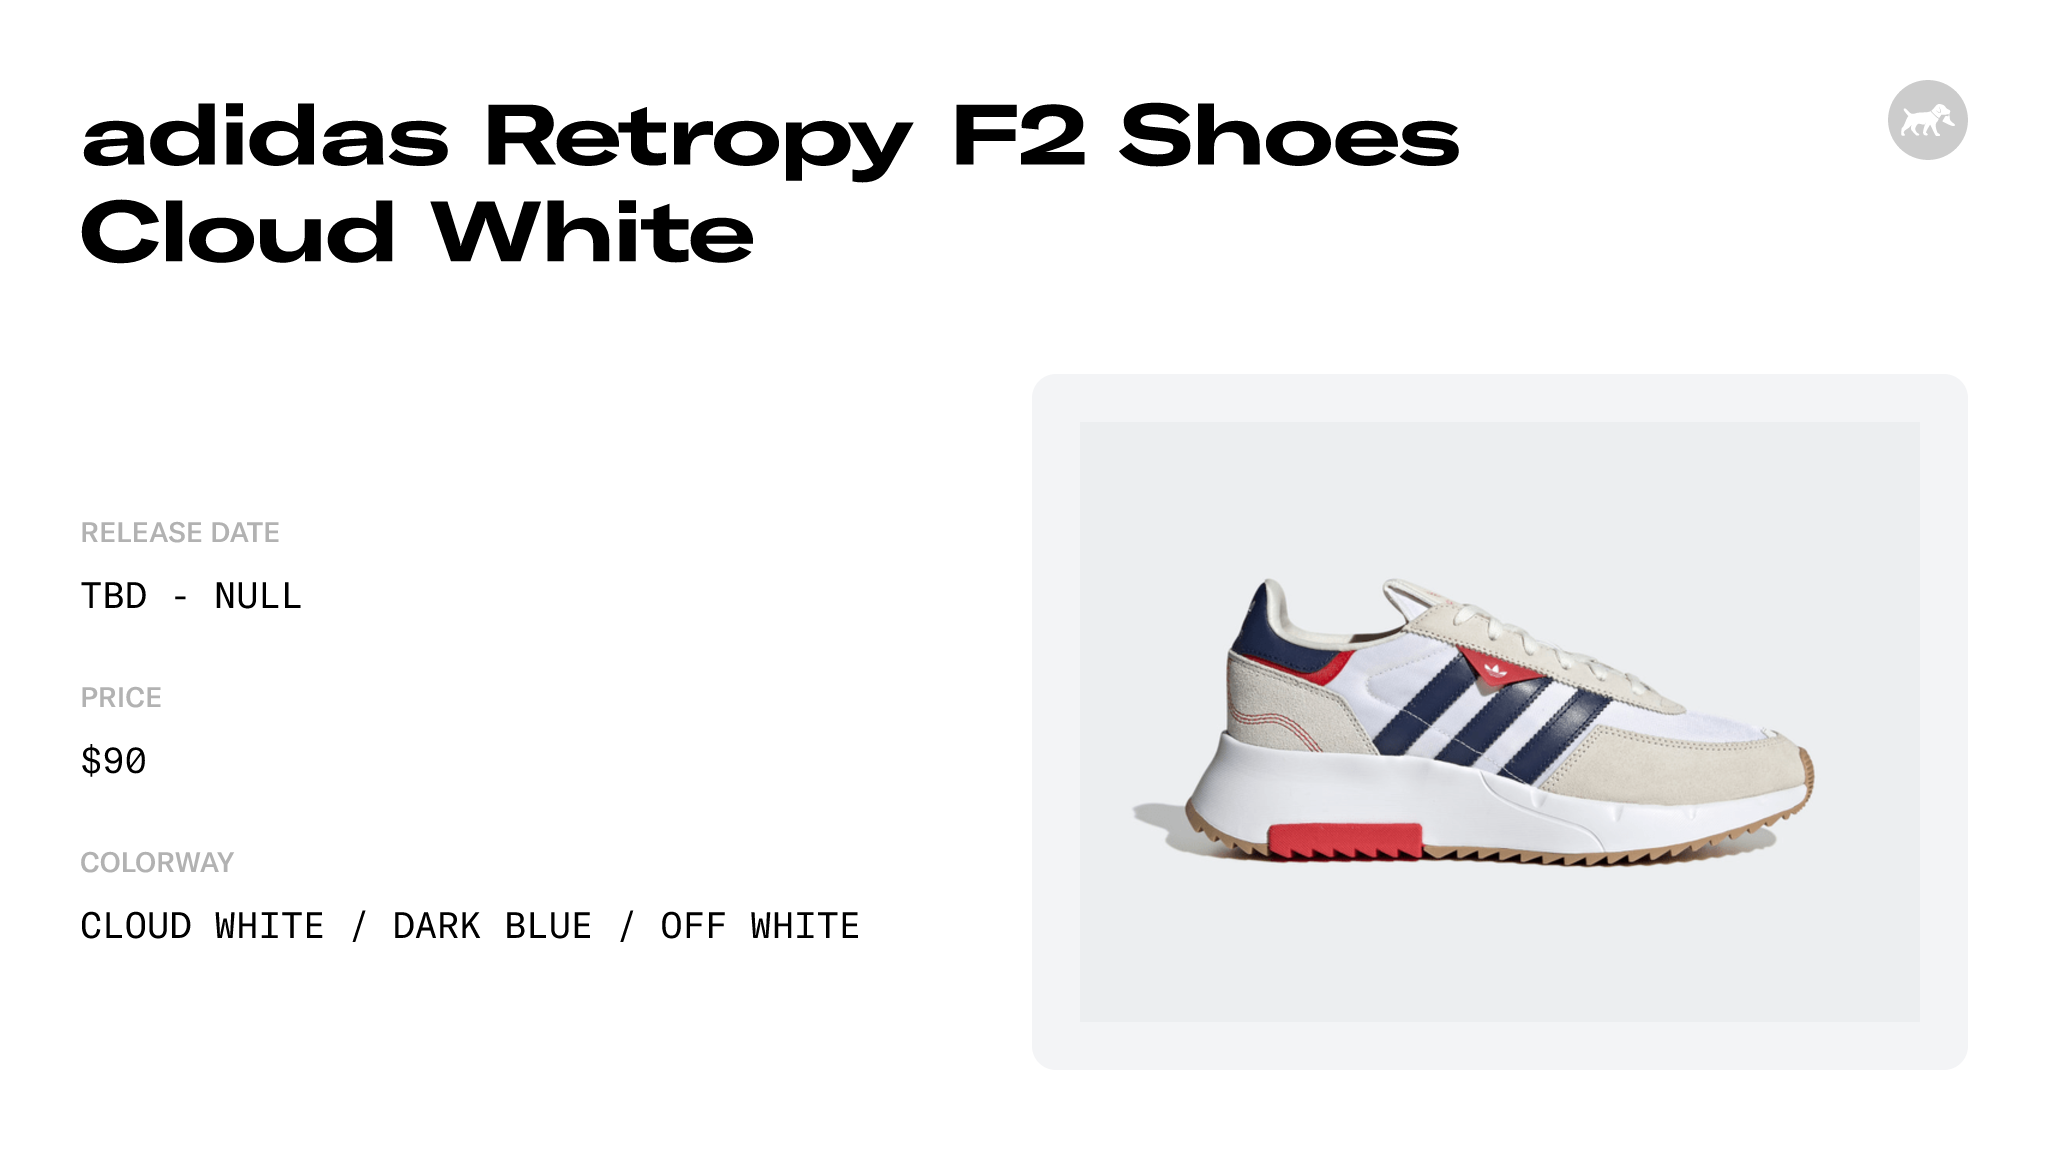 adidas Retropy F2 Shoes Cloud White - GW9354 Raffles and Release Date